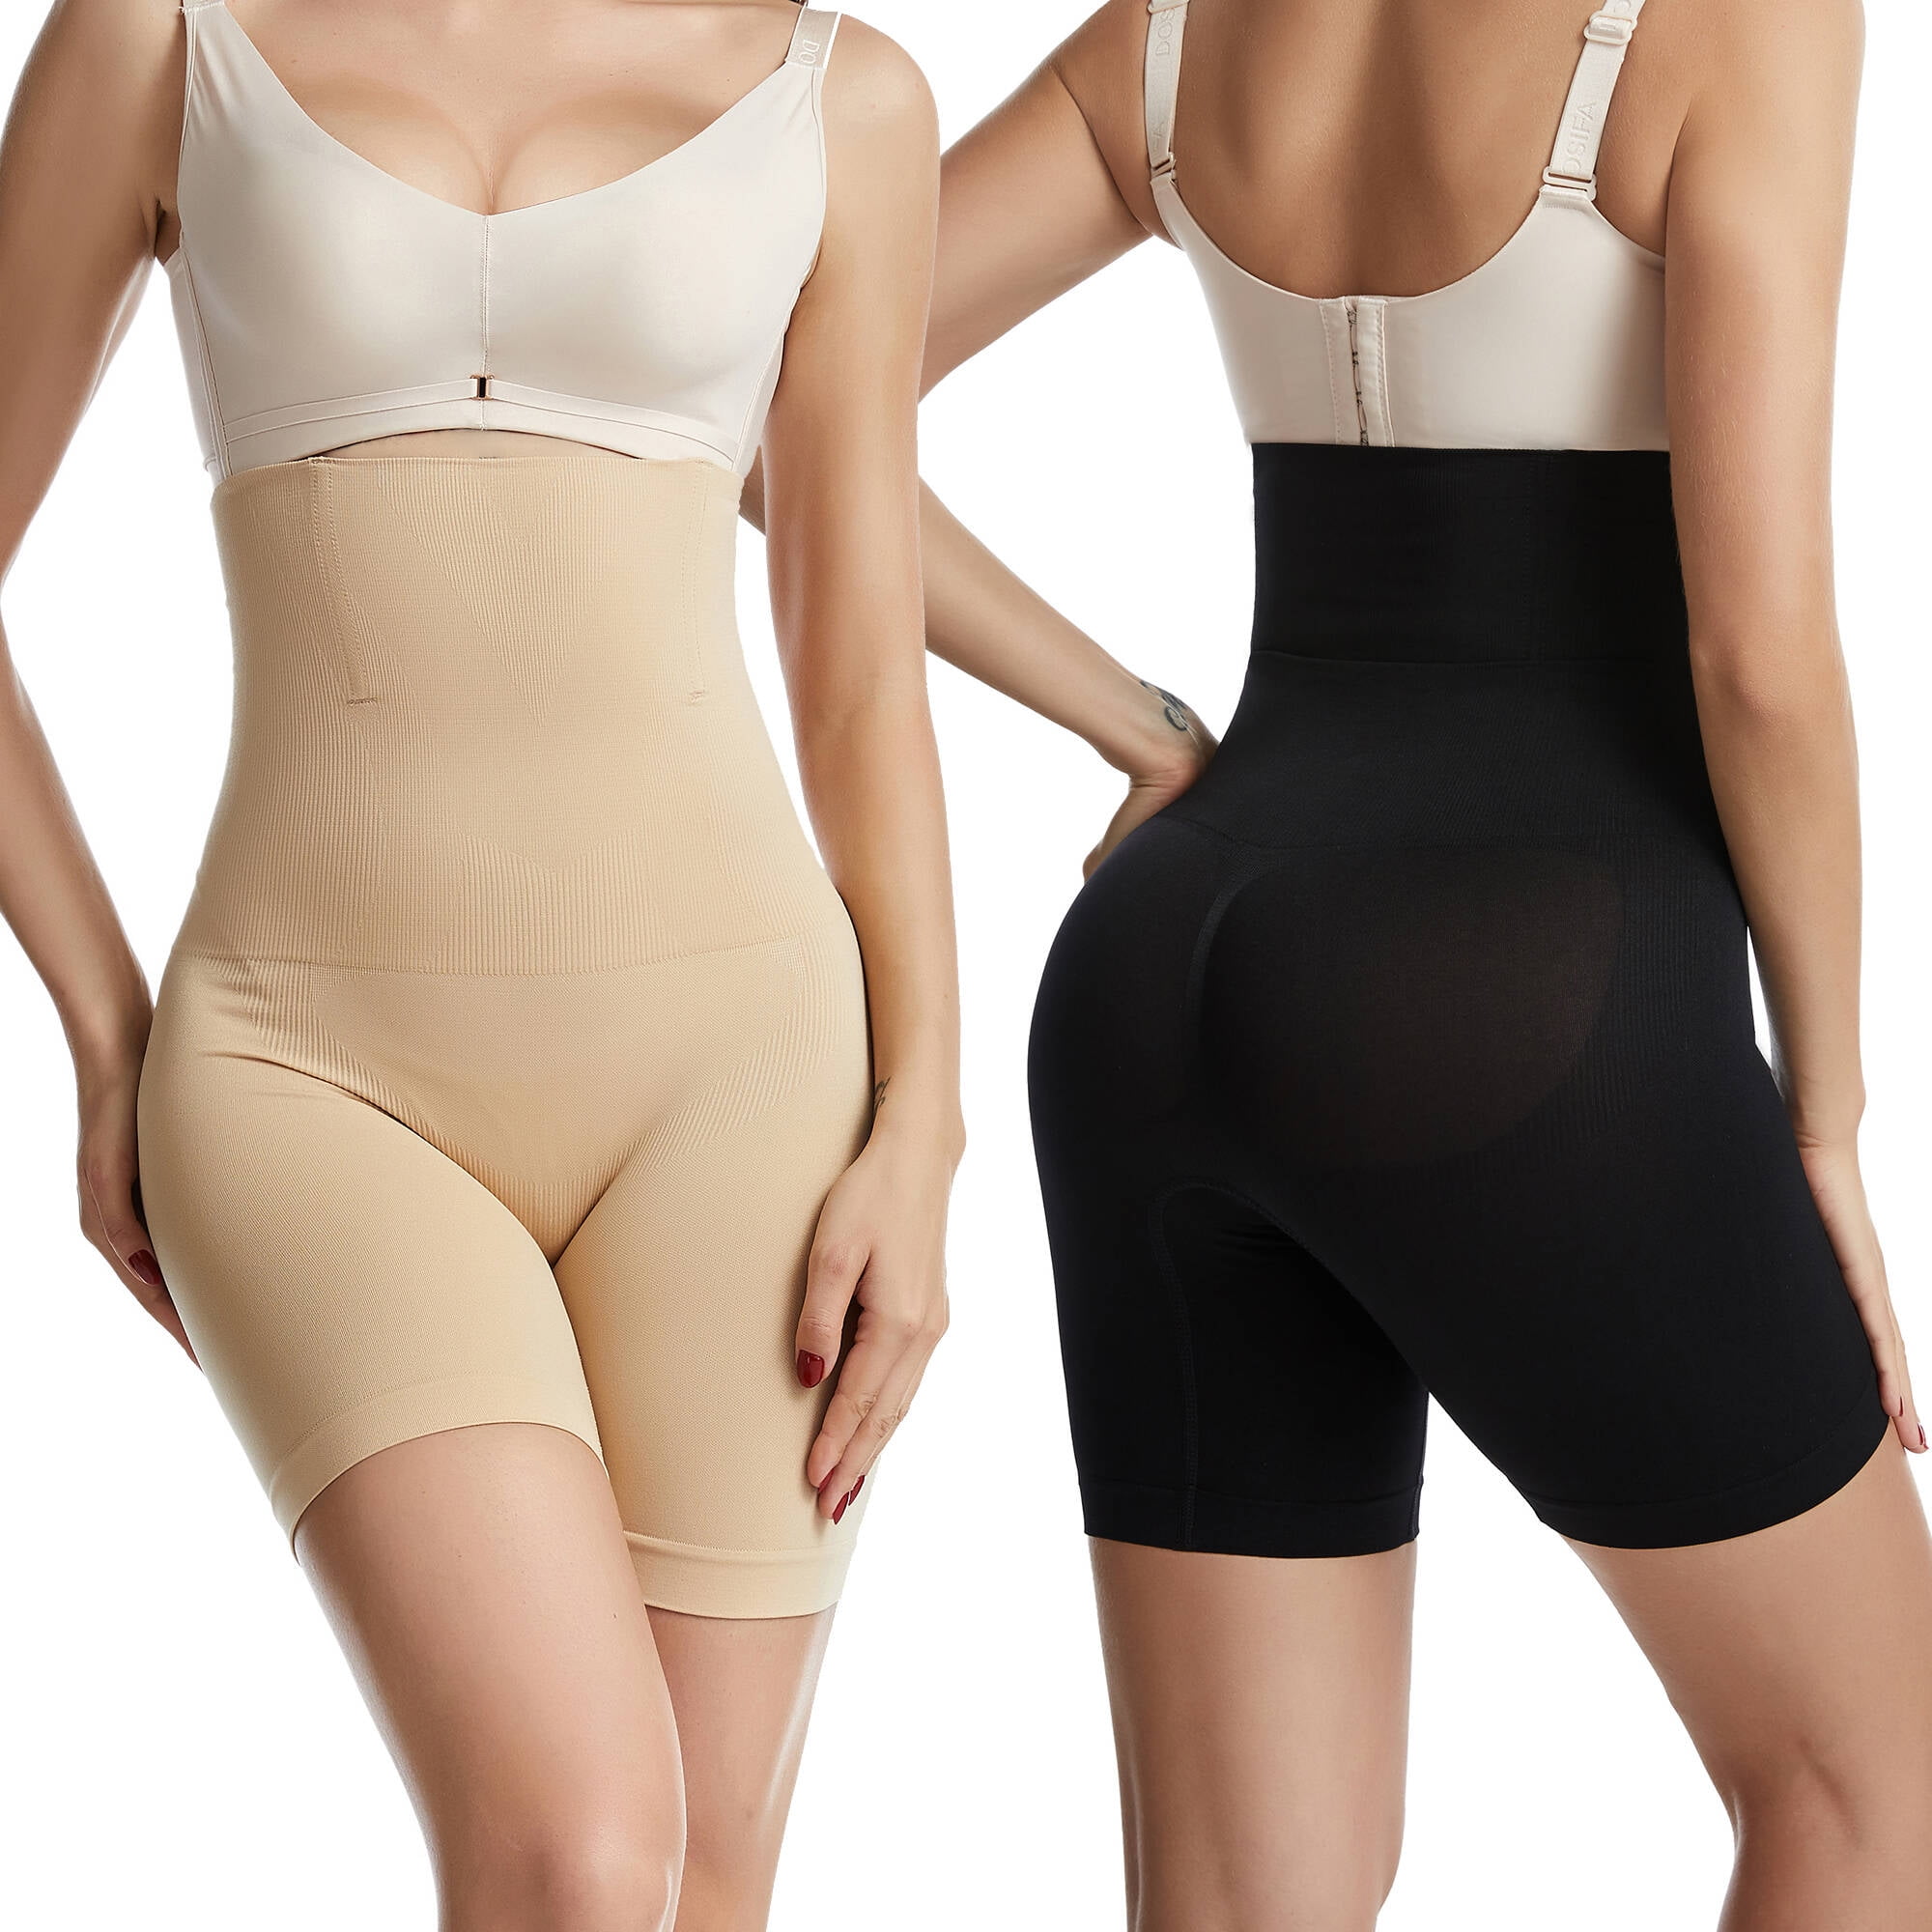 Elastic Anti-chafing Slip Shorts Body Sculpting Panties Safety Shorts For  Under Dress Mini Skirts